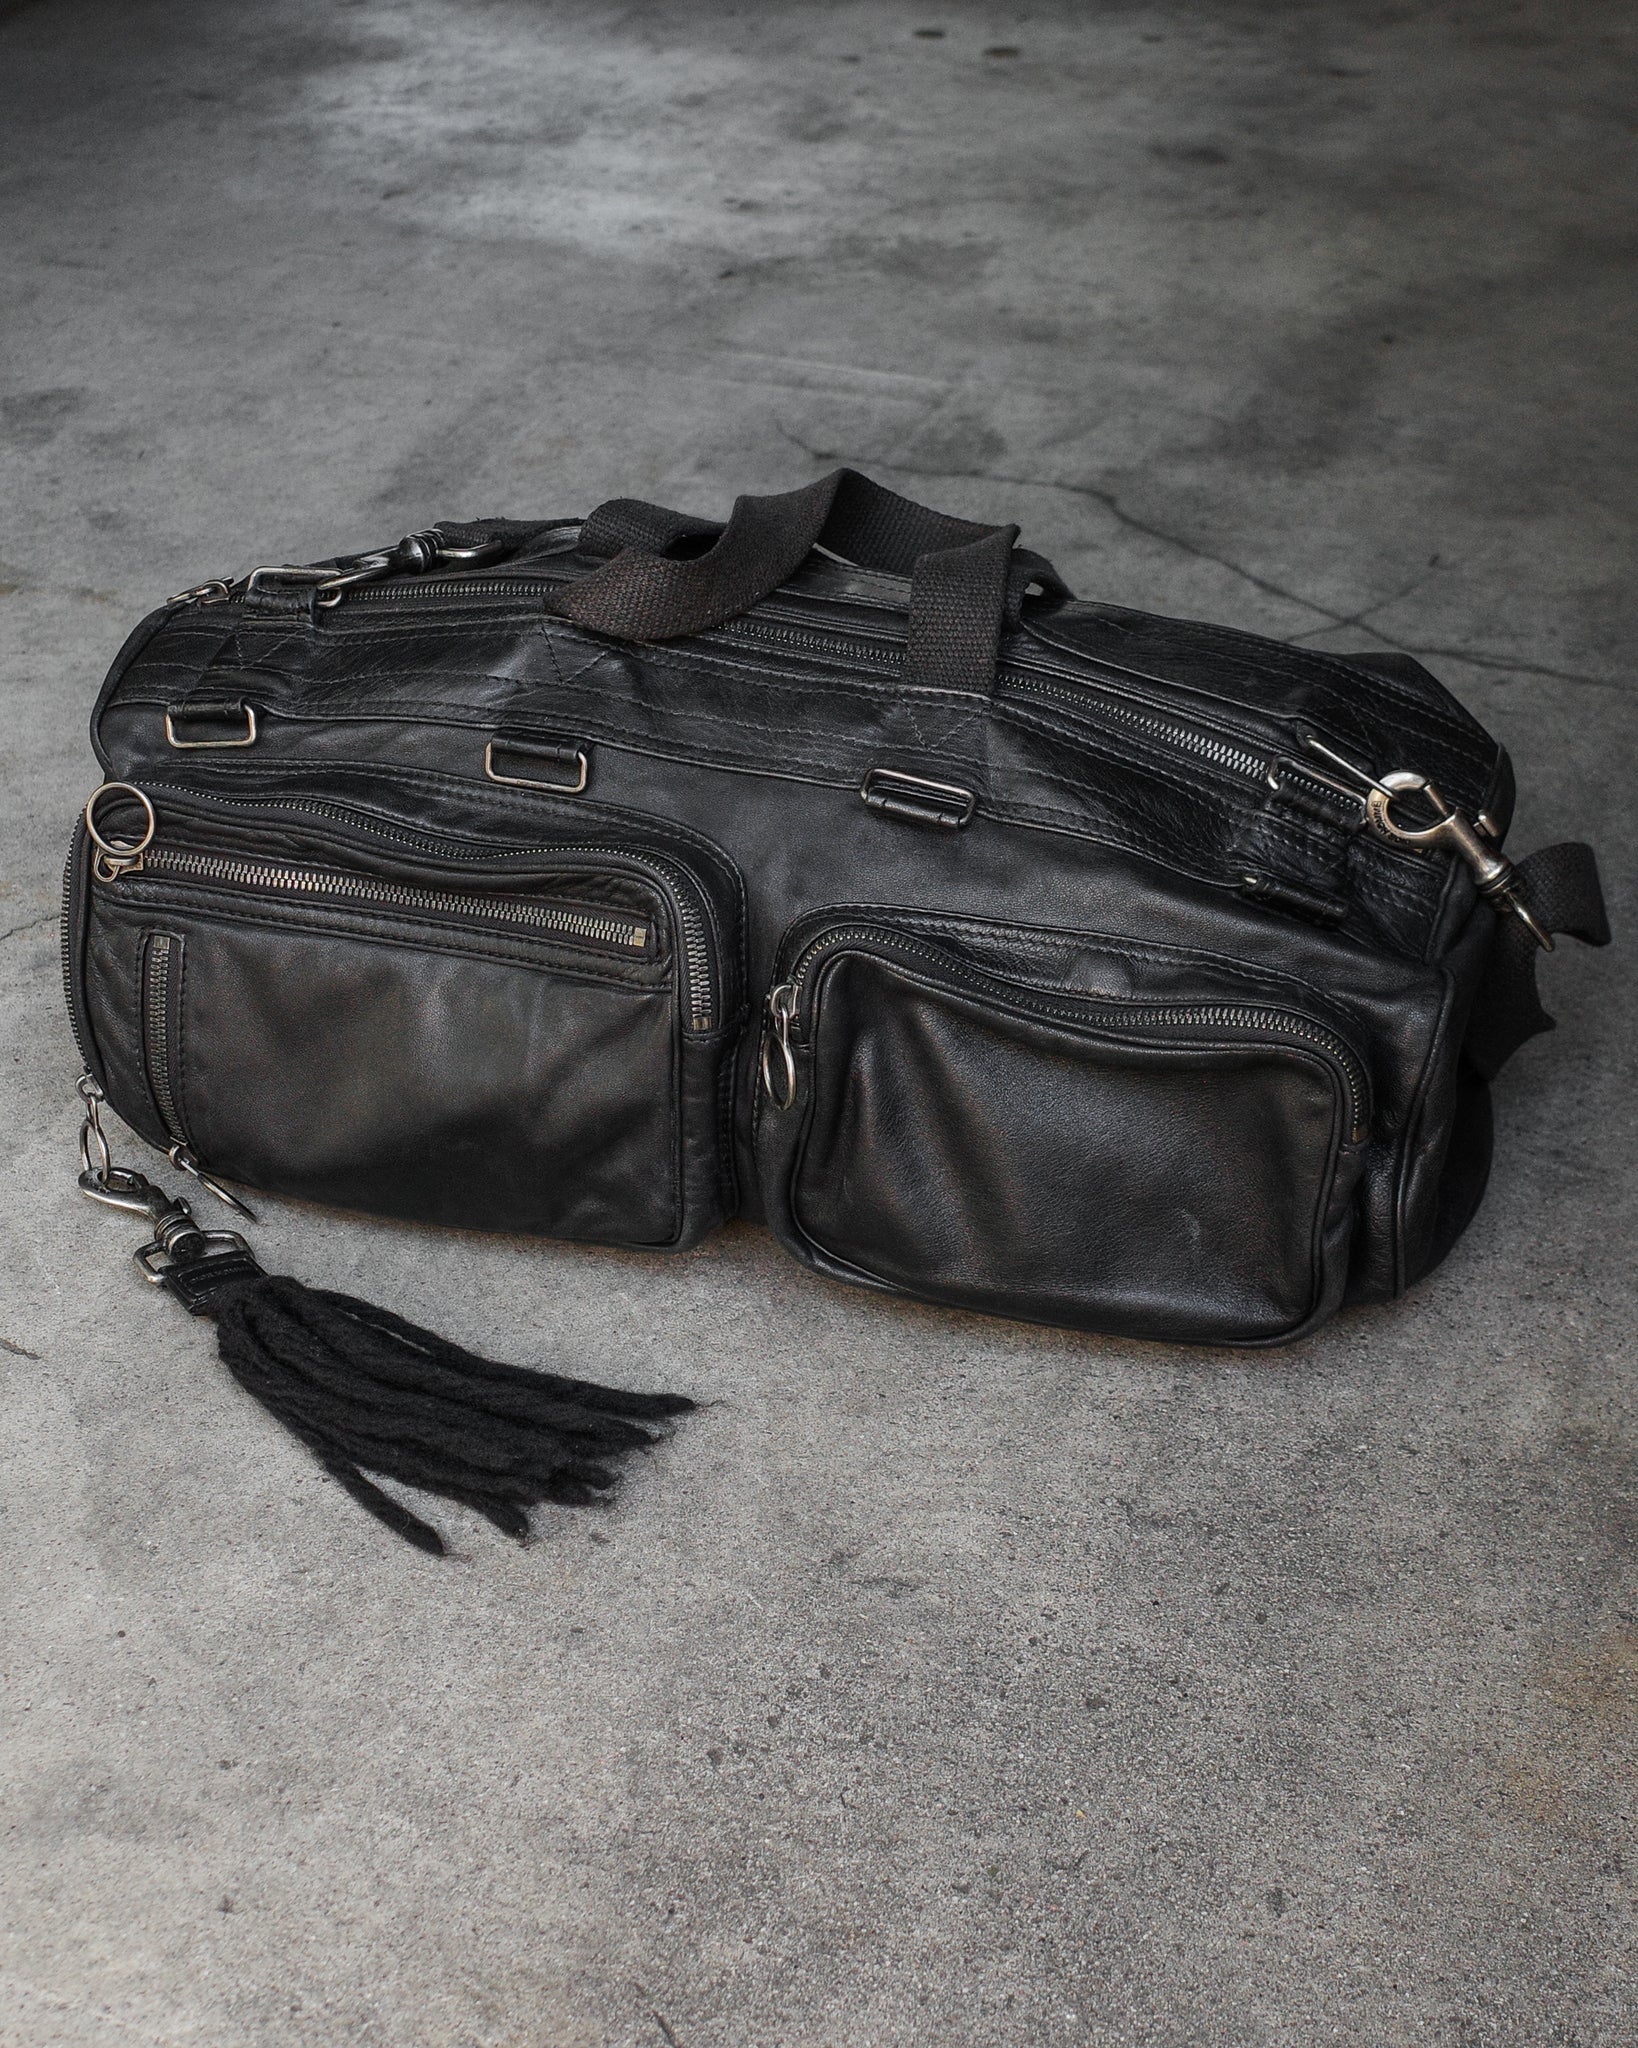 Dior Homme AW06 Deville Duffle Bag